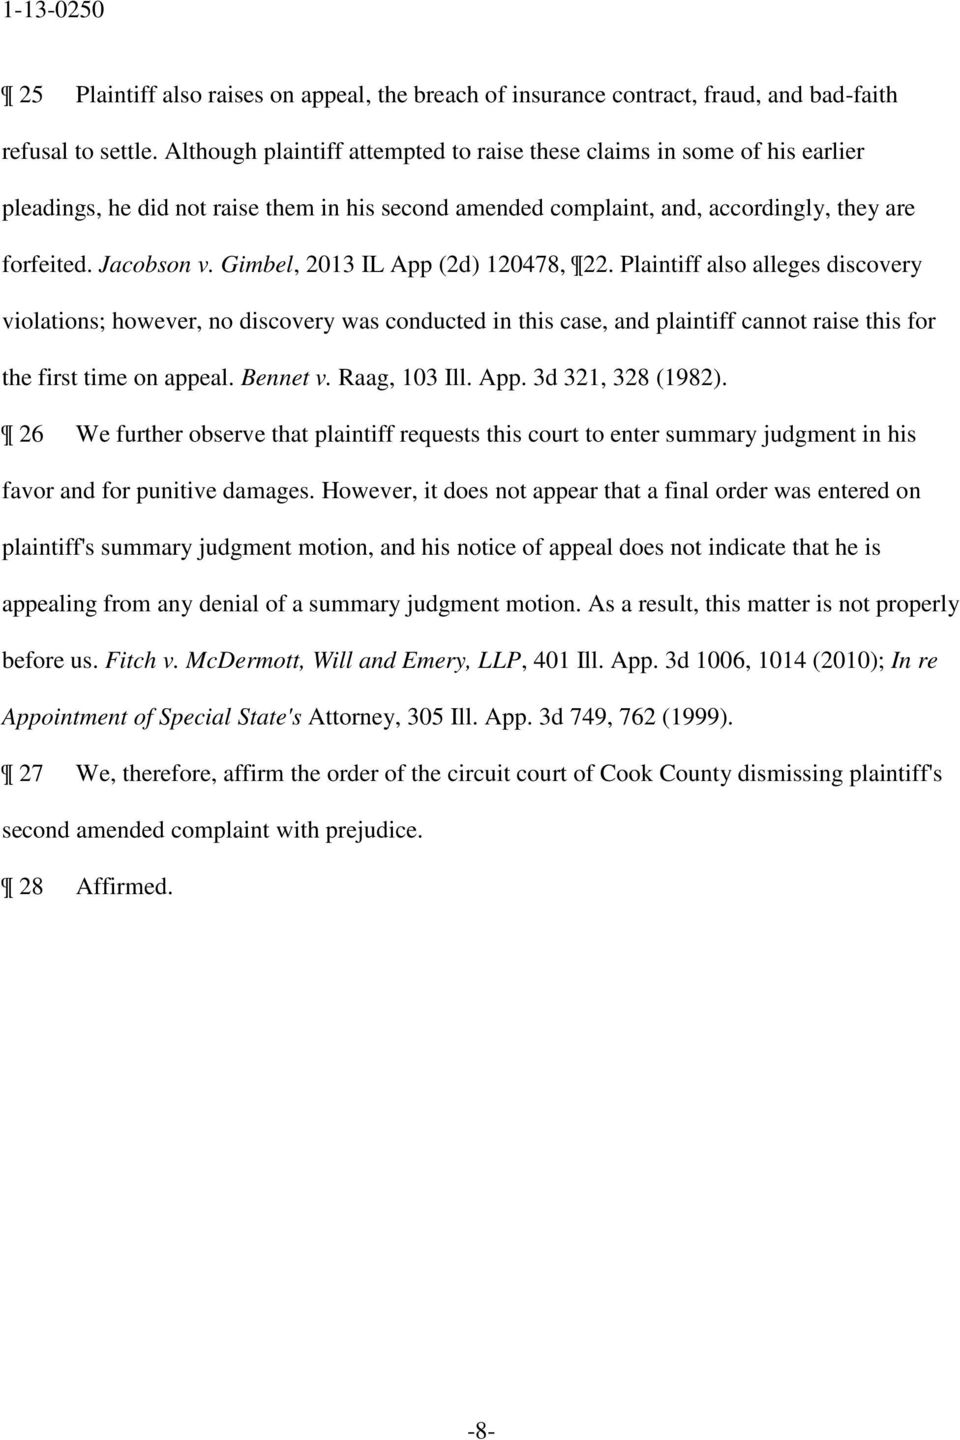 Gimbel, 2013 IL App (2d) 120478, 22. Plaintiff also alleges discovery violations; however, no discovery was conducted in this case, and plaintiff cannot raise this for the first time on appeal.